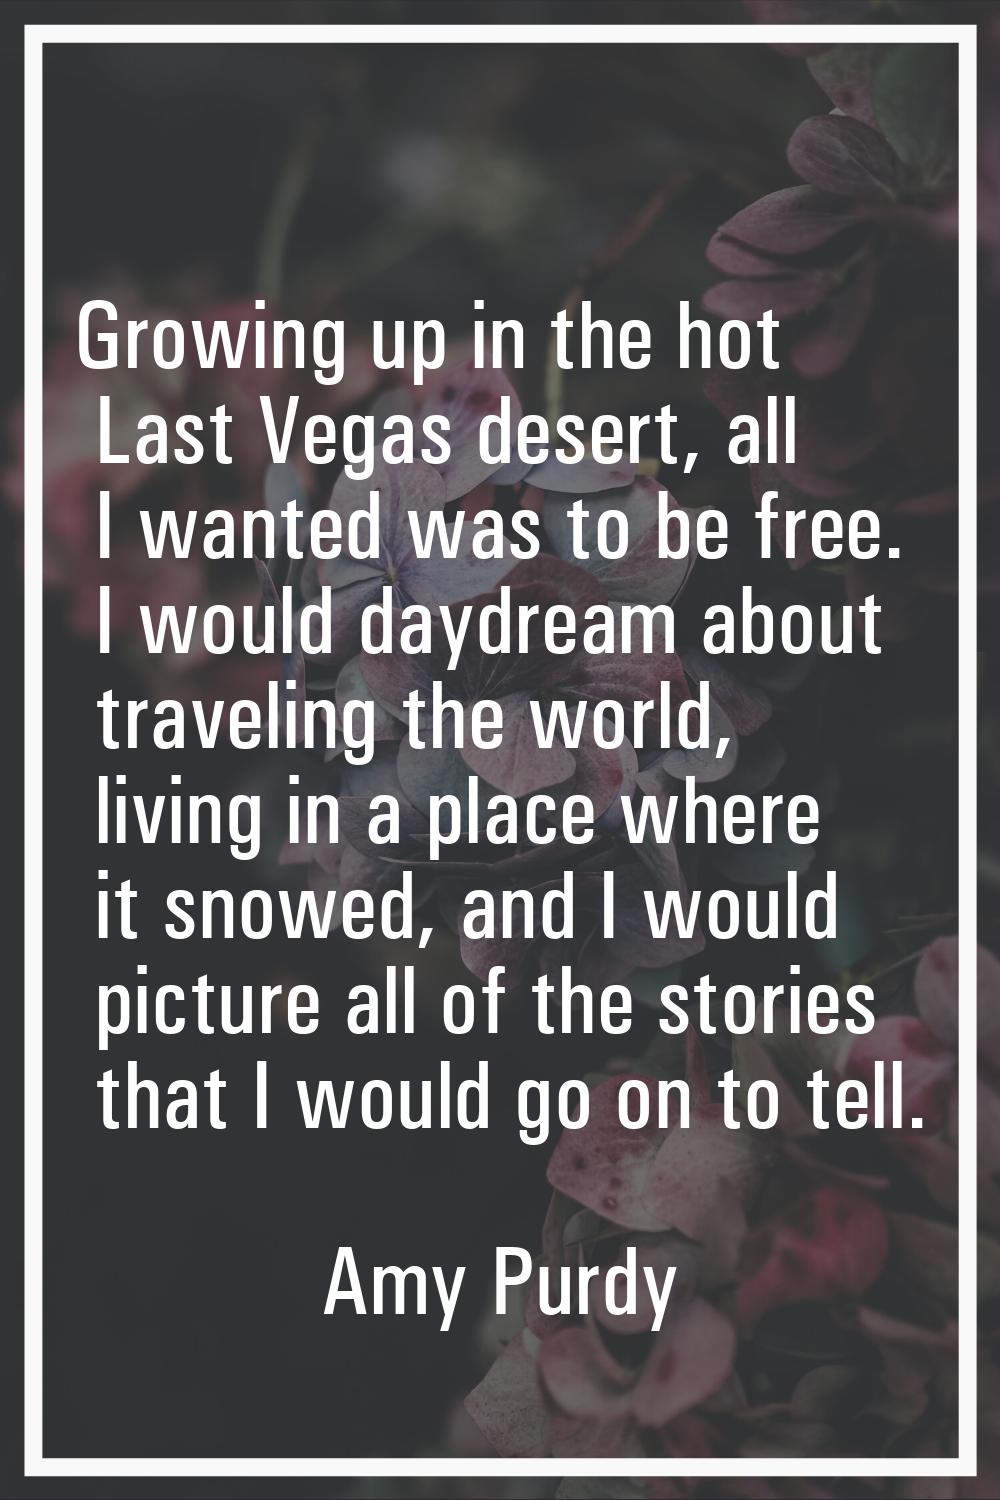 Growing up in the hot Last Vegas desert, all I wanted was to be free. I would daydream about travel